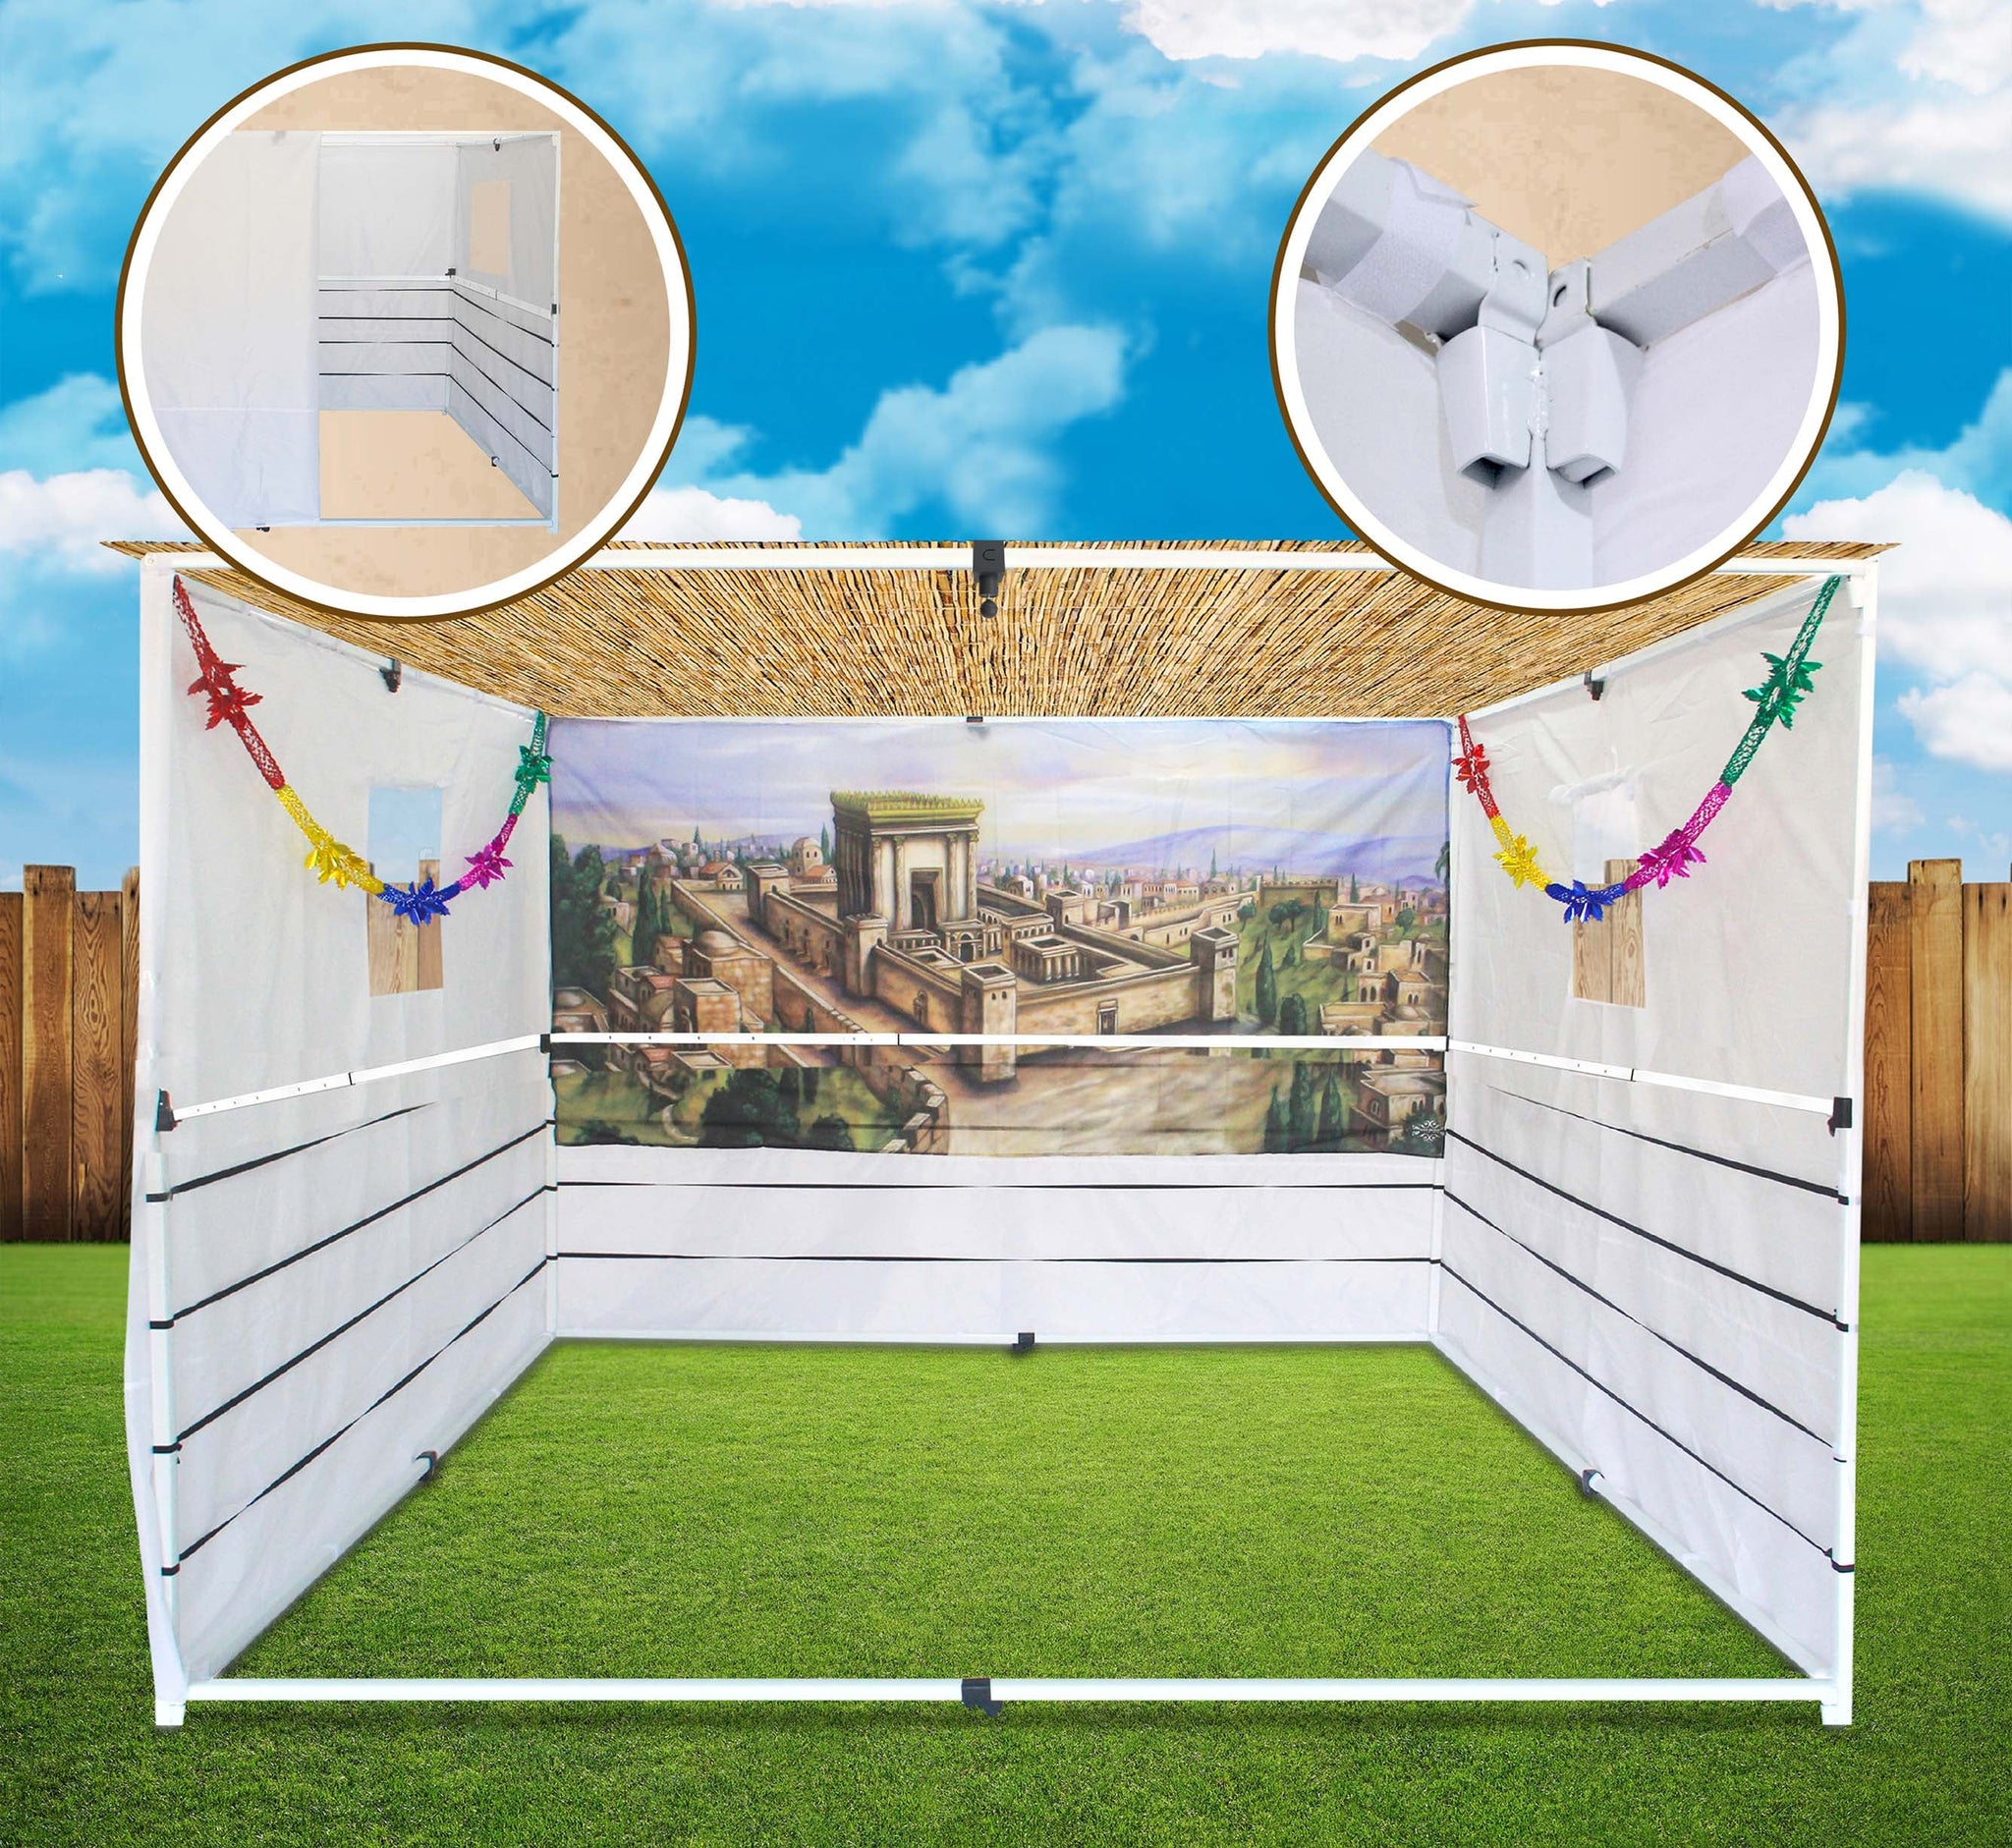 2022 Model - Sukkot Hadar Telescopic Sukkah Set: Portable, Adjustable, Kosher Certified - Expands from 4x5 to 8x10 Feet, Complete with Carry Bag